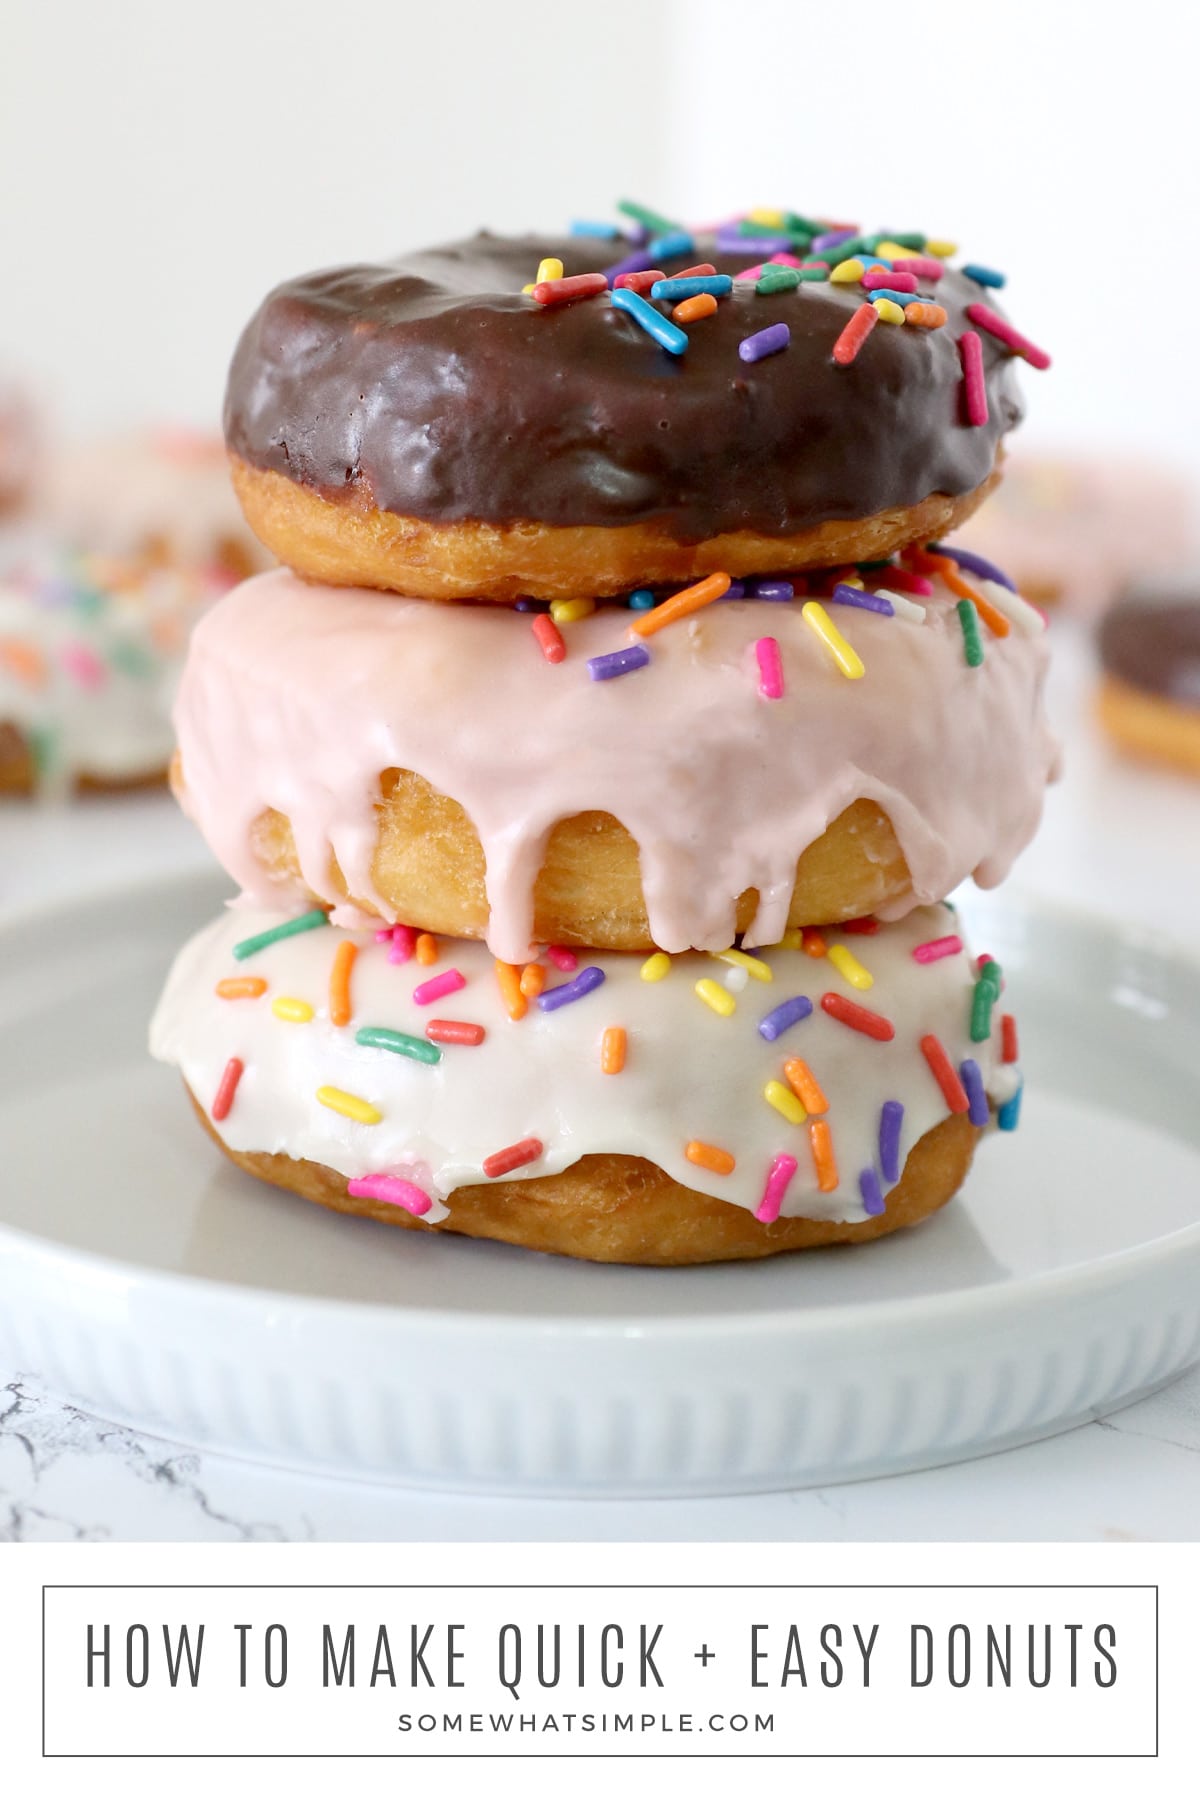 Satisfy your donut cravings with this easy 2 ingredient donut recipe! Light and fluffy biscuit donuts are drizzled with a simple glaze that will melt in your mouth! via @somewhatsimple